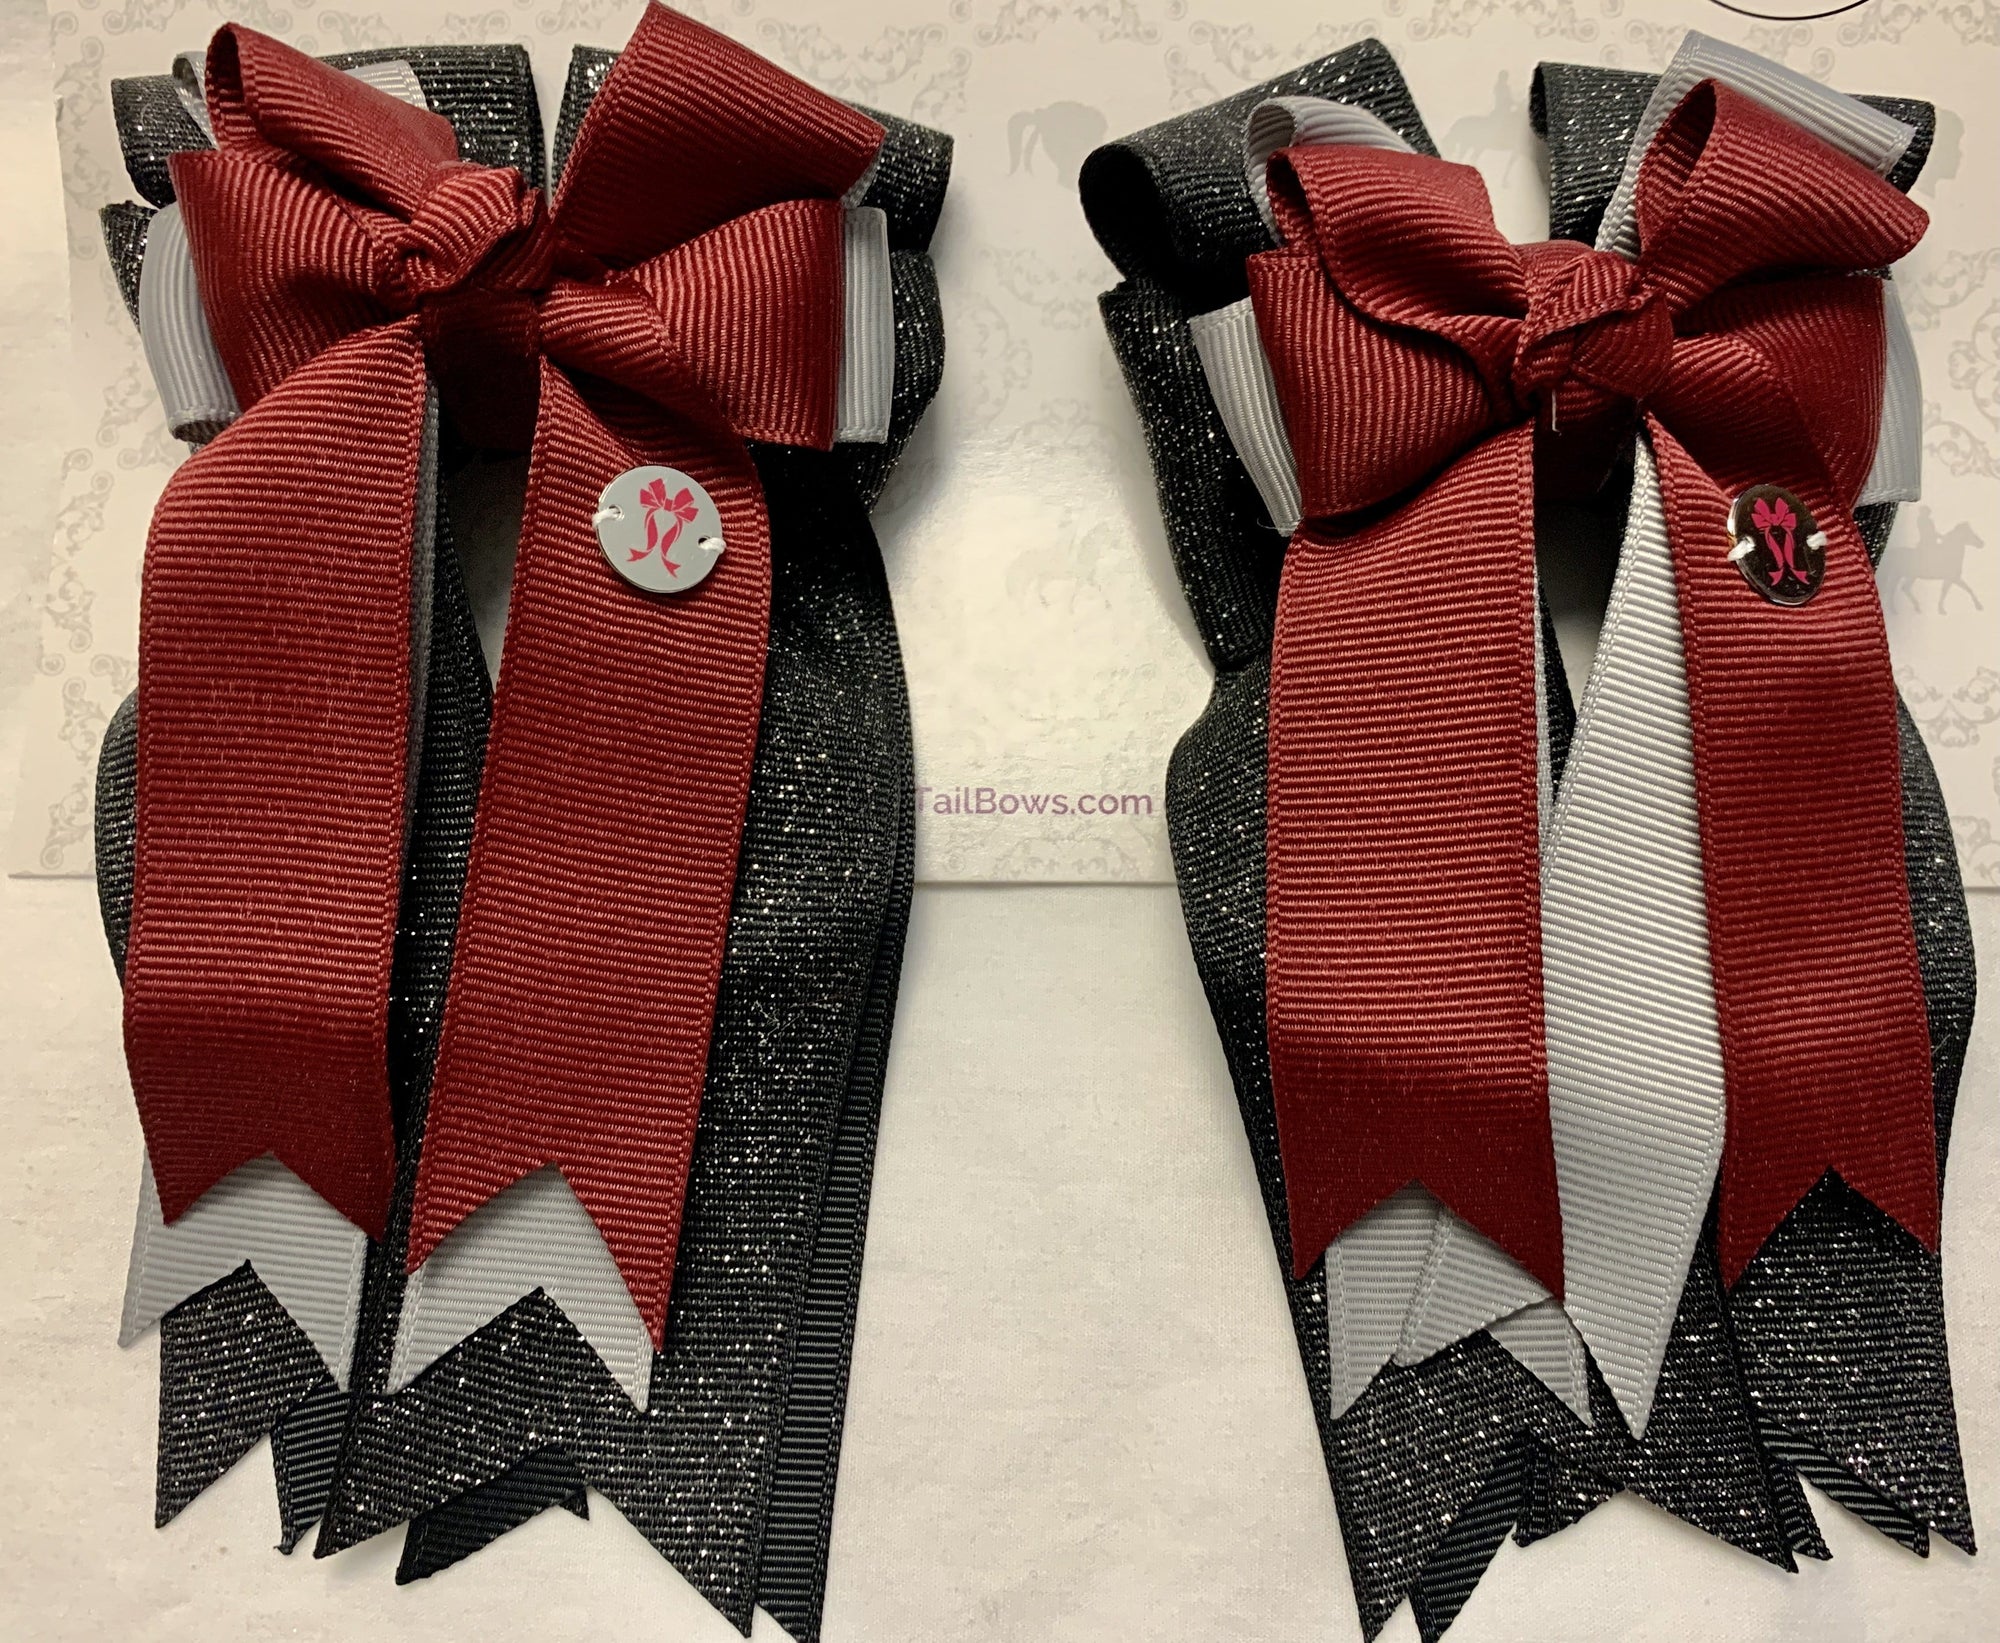 PonyTail Bows 3" Tails Midnight Burgundy PonyTail Bows equestrian team apparel online tack store mobile tack store custom farm apparel custom show stable clothing equestrian lifestyle horse show clothing riding clothes PonyTail Bows | Equestrian Hair Accessories horses equestrian tack store